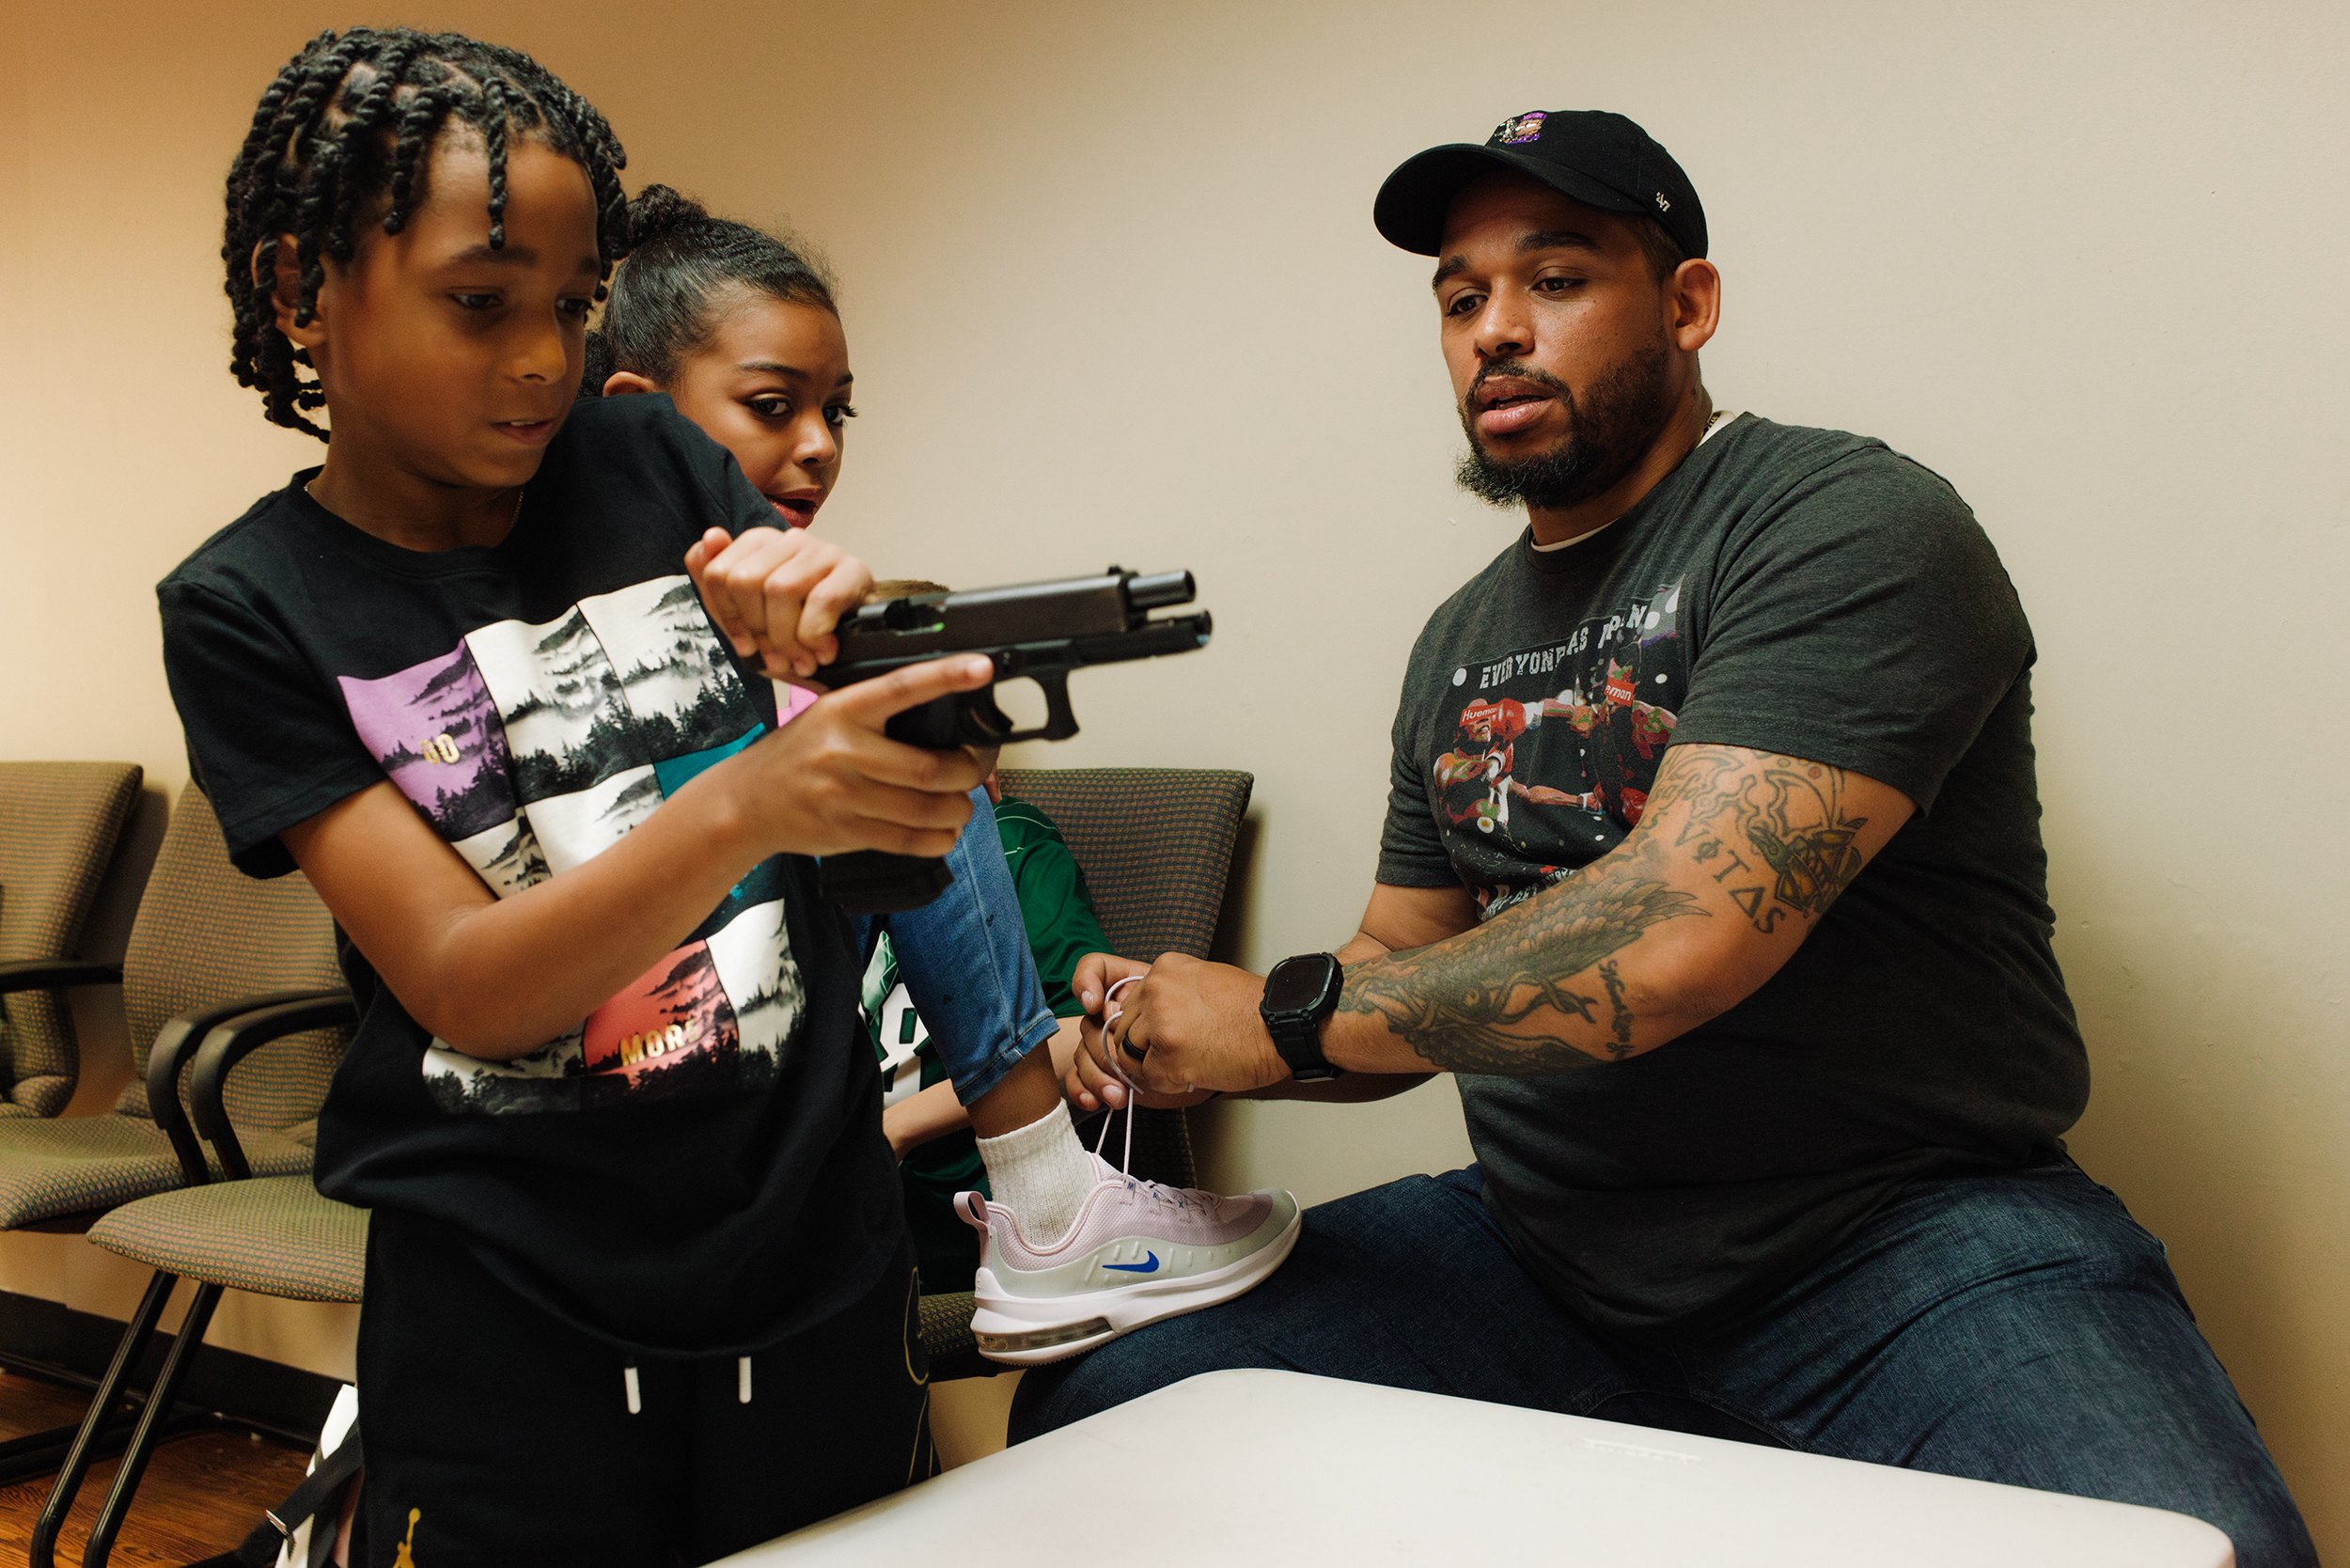  Donkor Minors ties his daughter, N.A. Minors’, 10, shoe while instructing David Vazquez-Parker, 10, how to properly load and unload a handgun at The Don Firearms training in Mattapan Square in Boston.  As of October, there have been 530 mass shootin